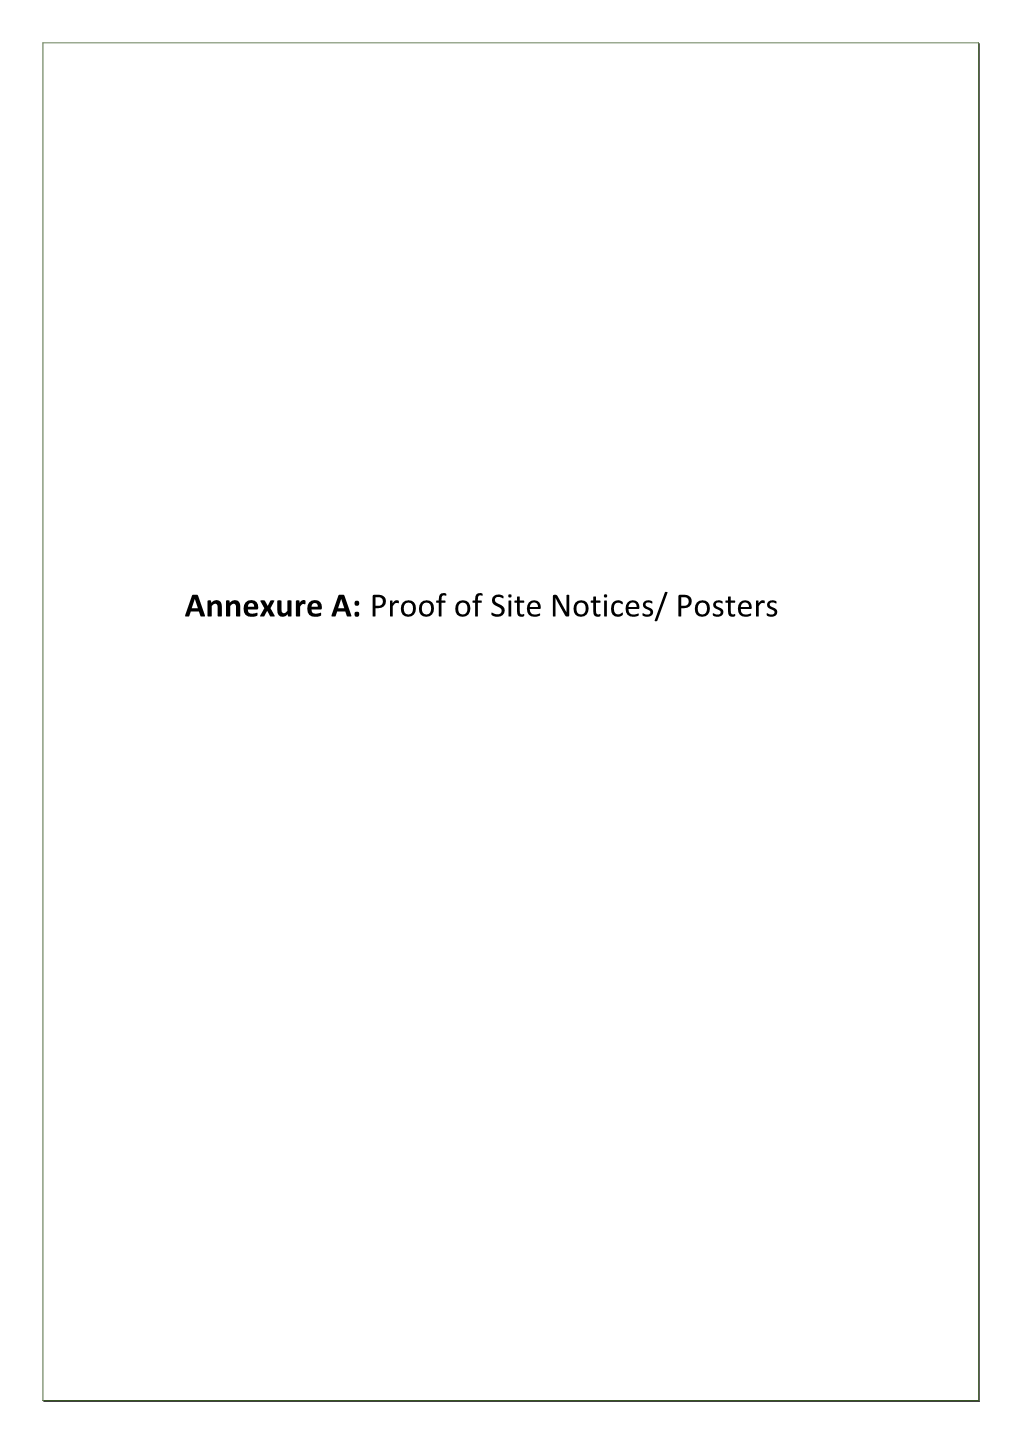 Annexure A: Proof of Site Notices/ Posters